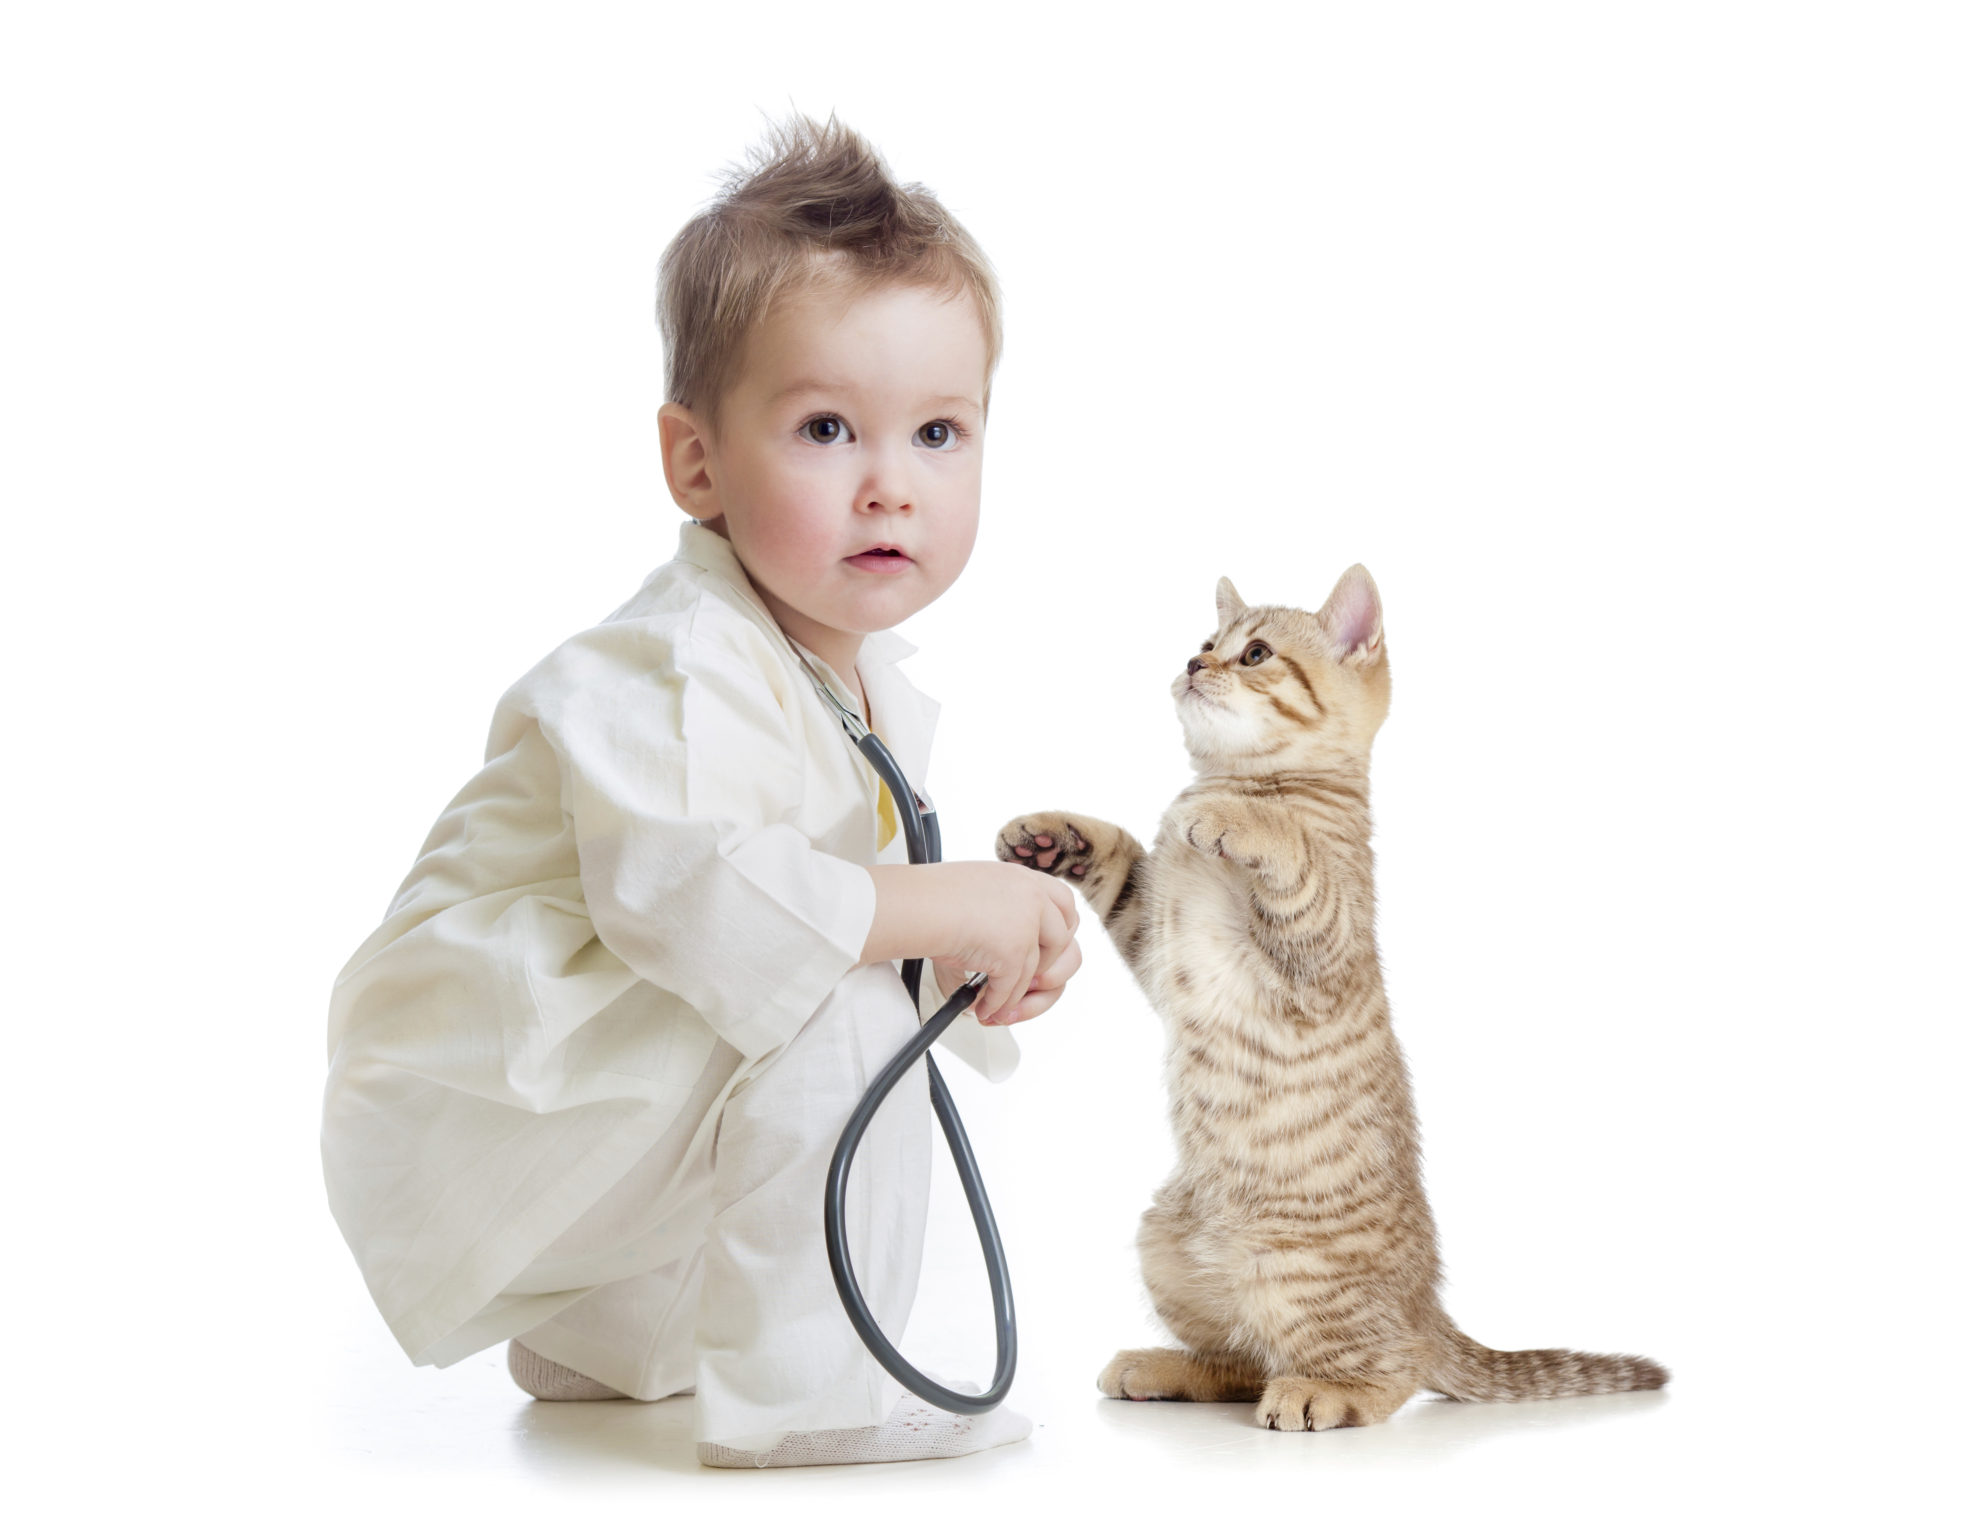 kid or child playing doctor with stethoscope and cat